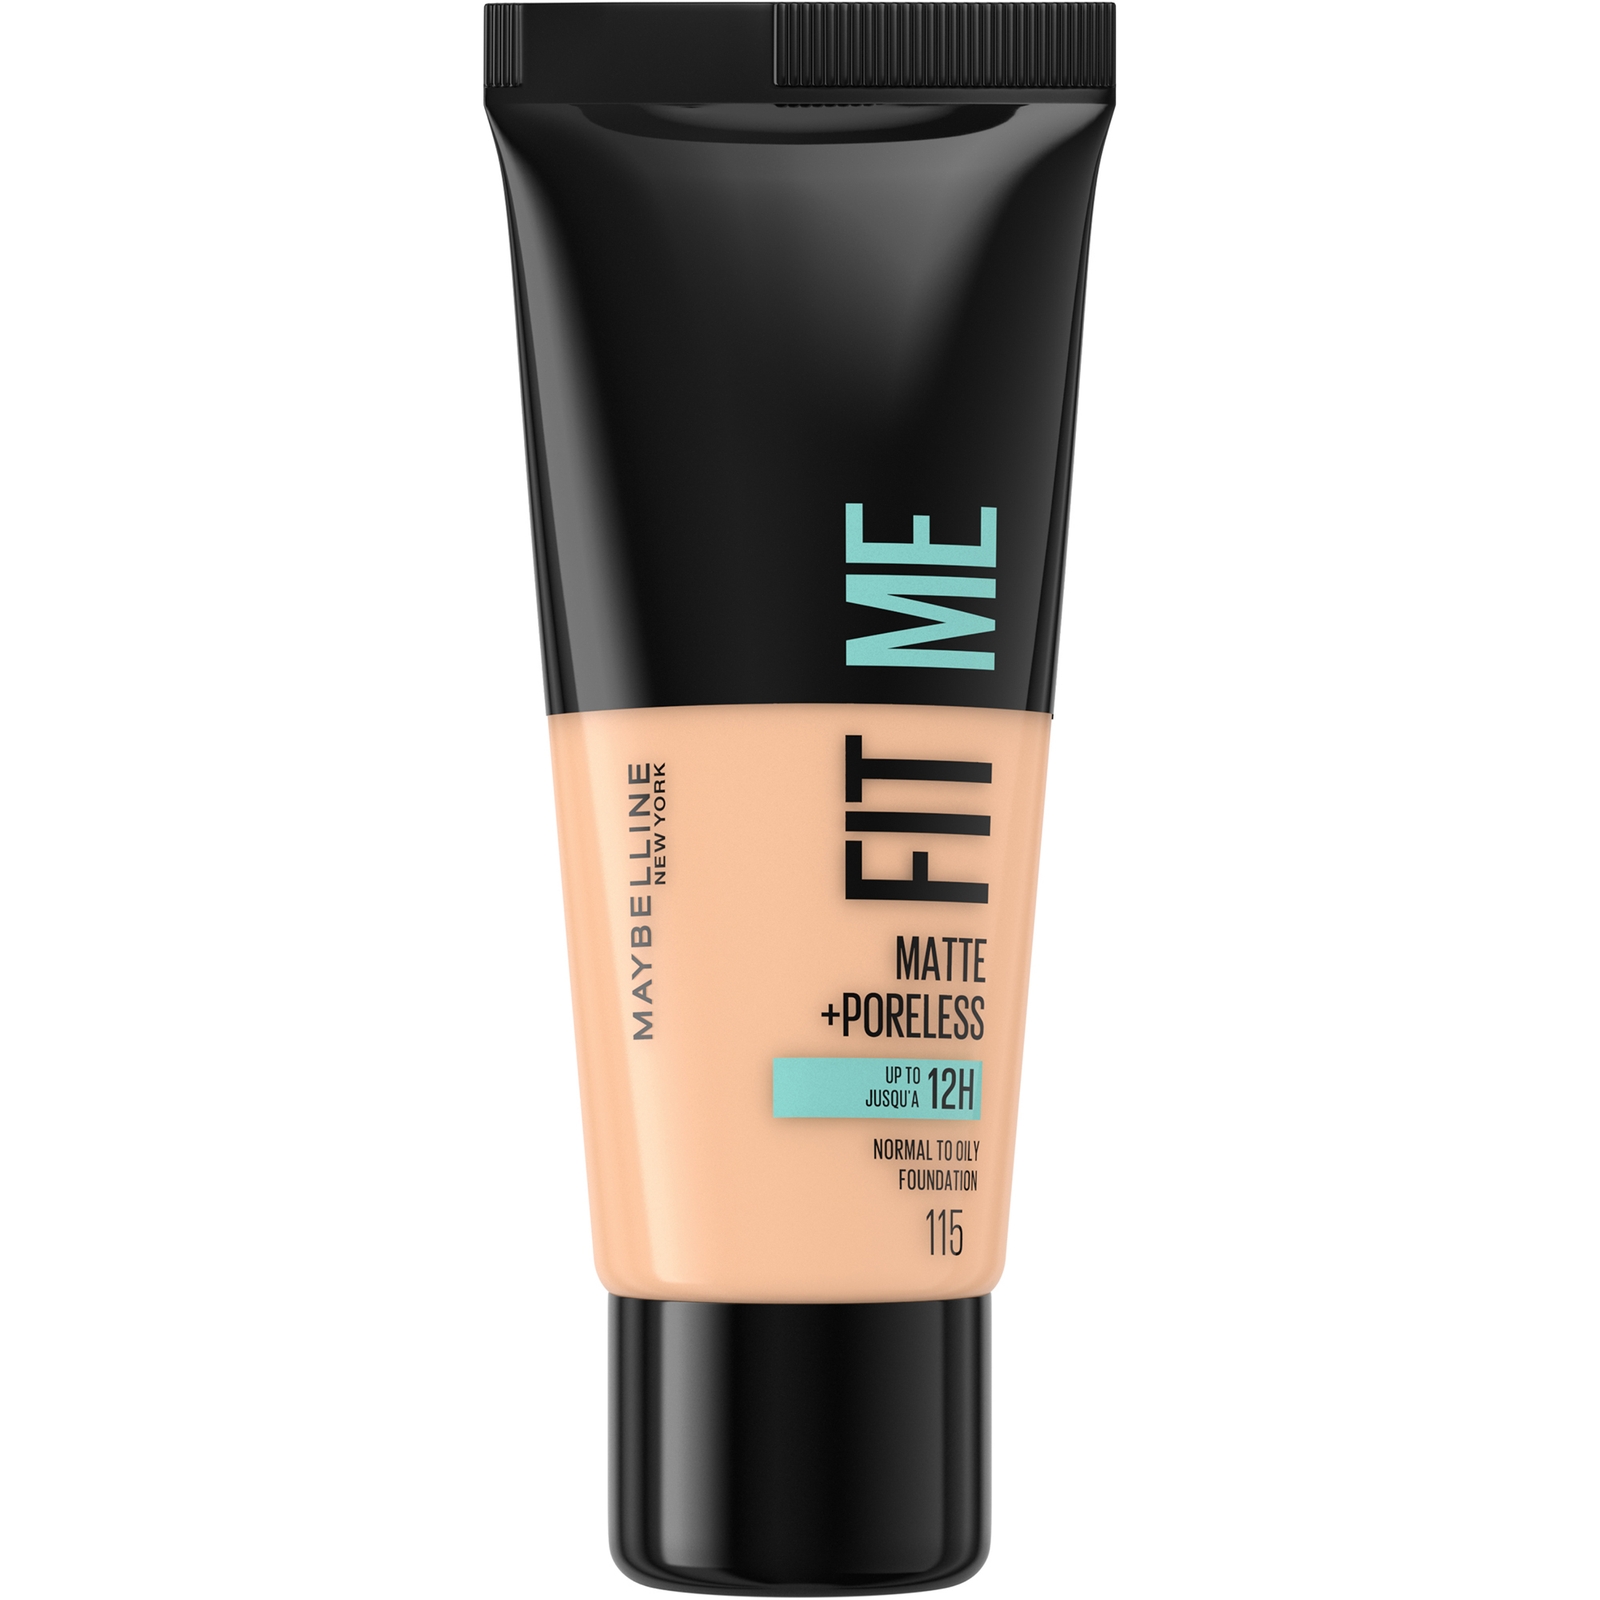 Maybelline Fit Me! Matte and Poreless Foundation 30ml (Various Shades) - 115 Ivory